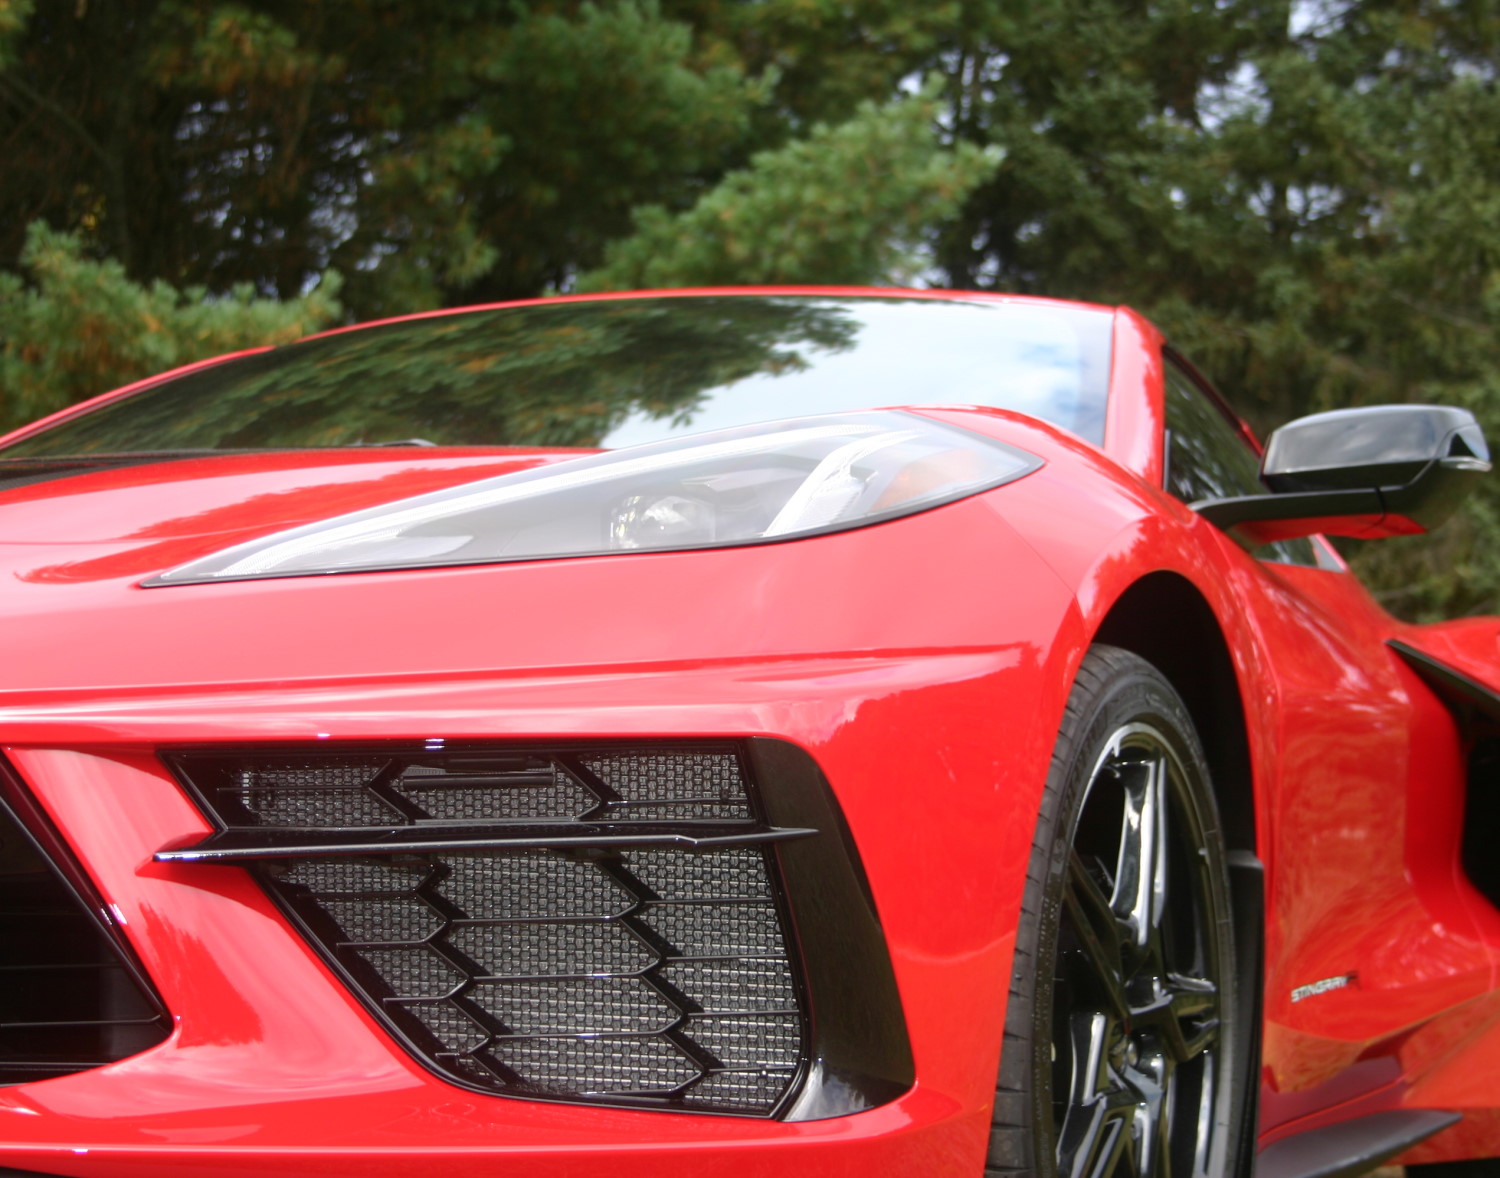 Maximizing Performance and Protection with a Radiator Grille Screen on Your C8 Corvette